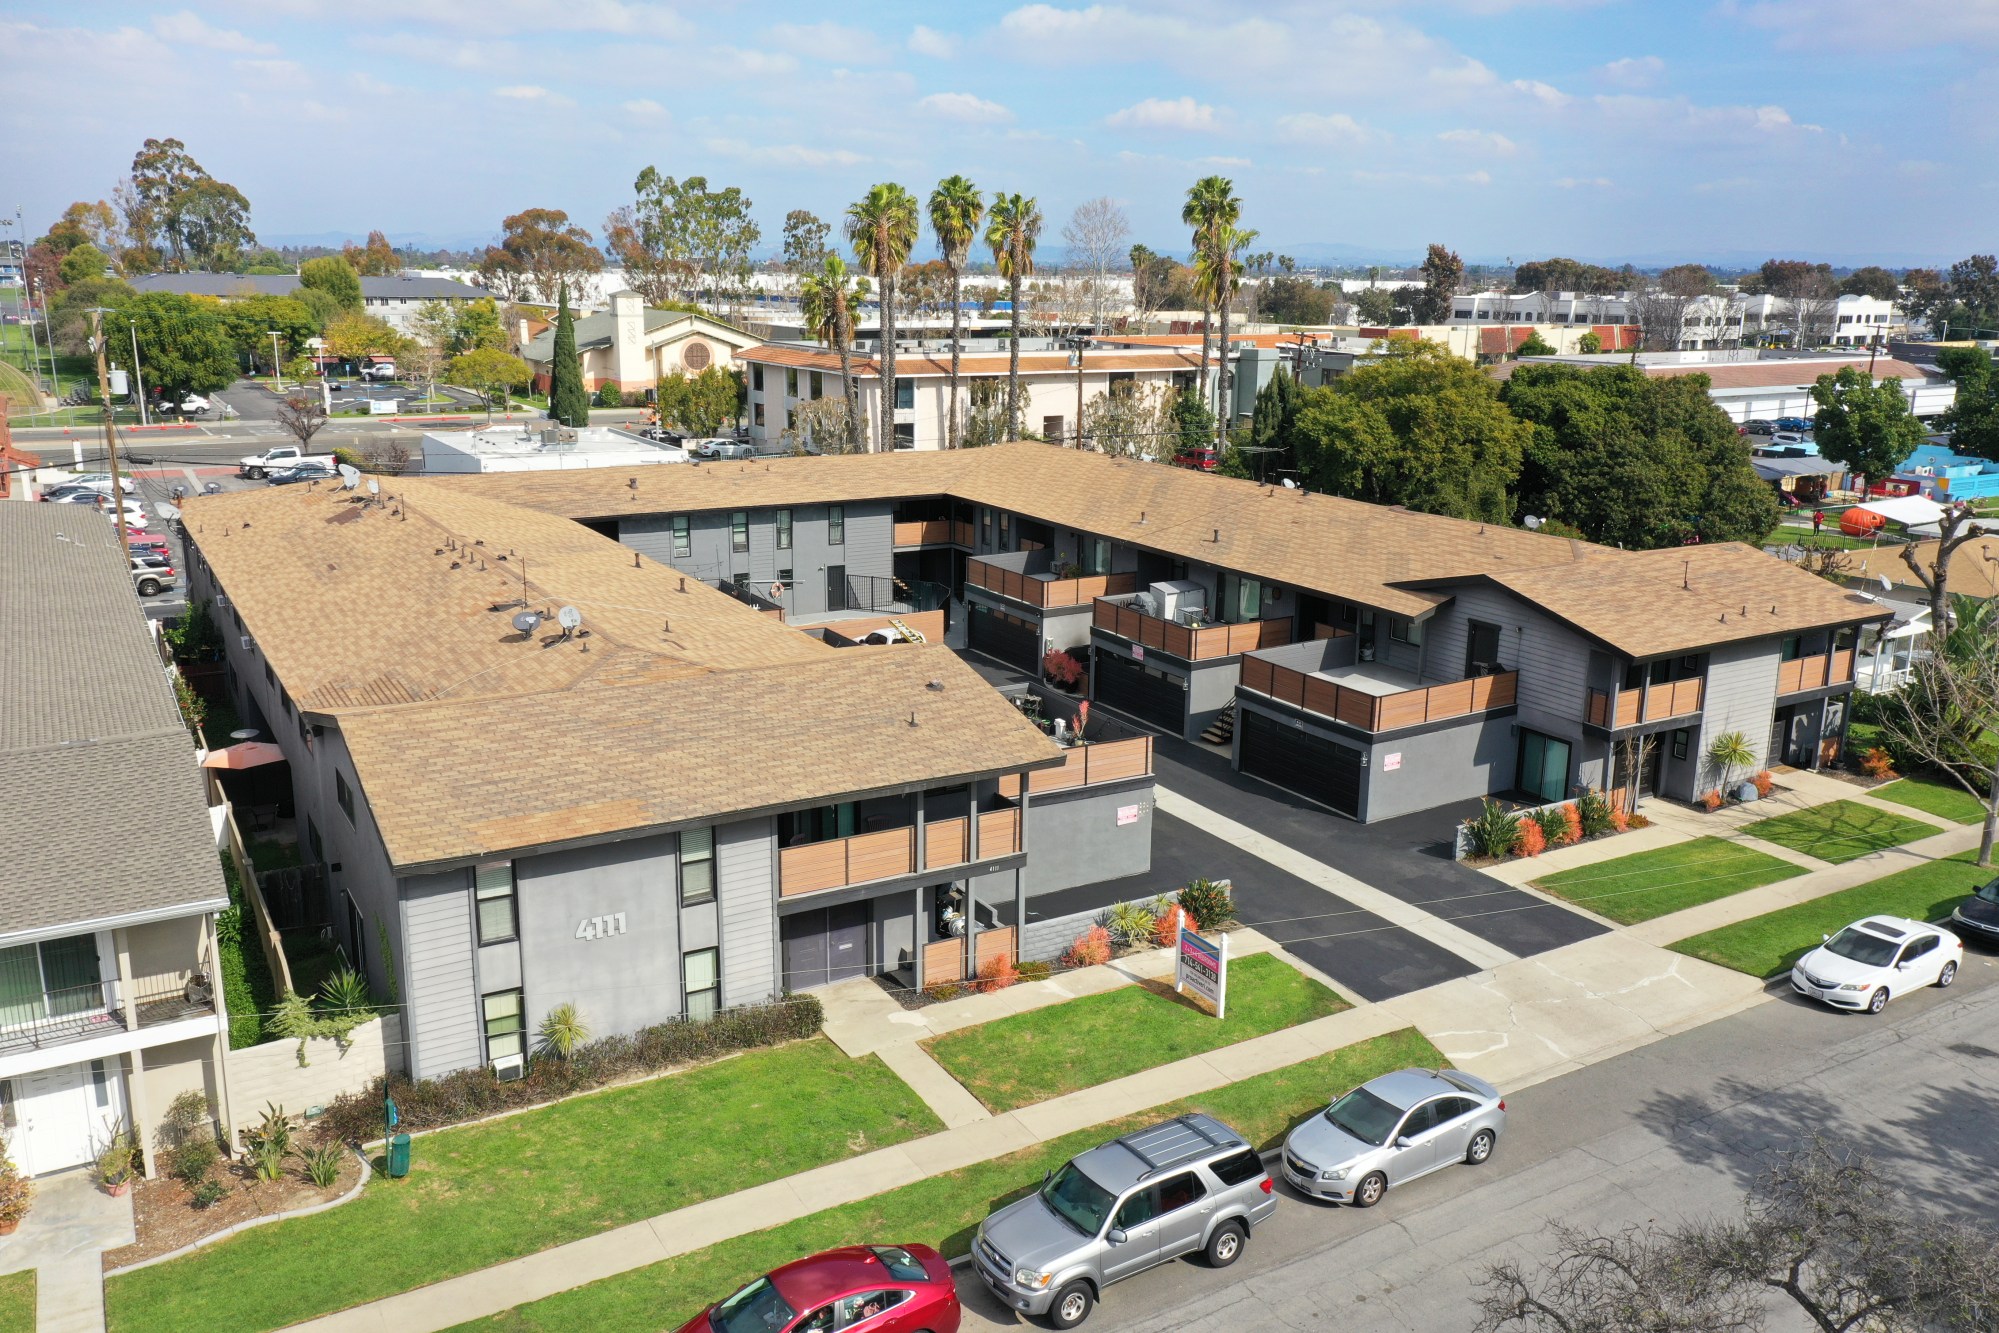 In Los Alamitos, this 20-unit, 57-year-old apartment complex sold June 6 for $8,637,500 or $431,875 per unit. (Photo courtesy of Morgan Skenderian Investment Real Estate Group)